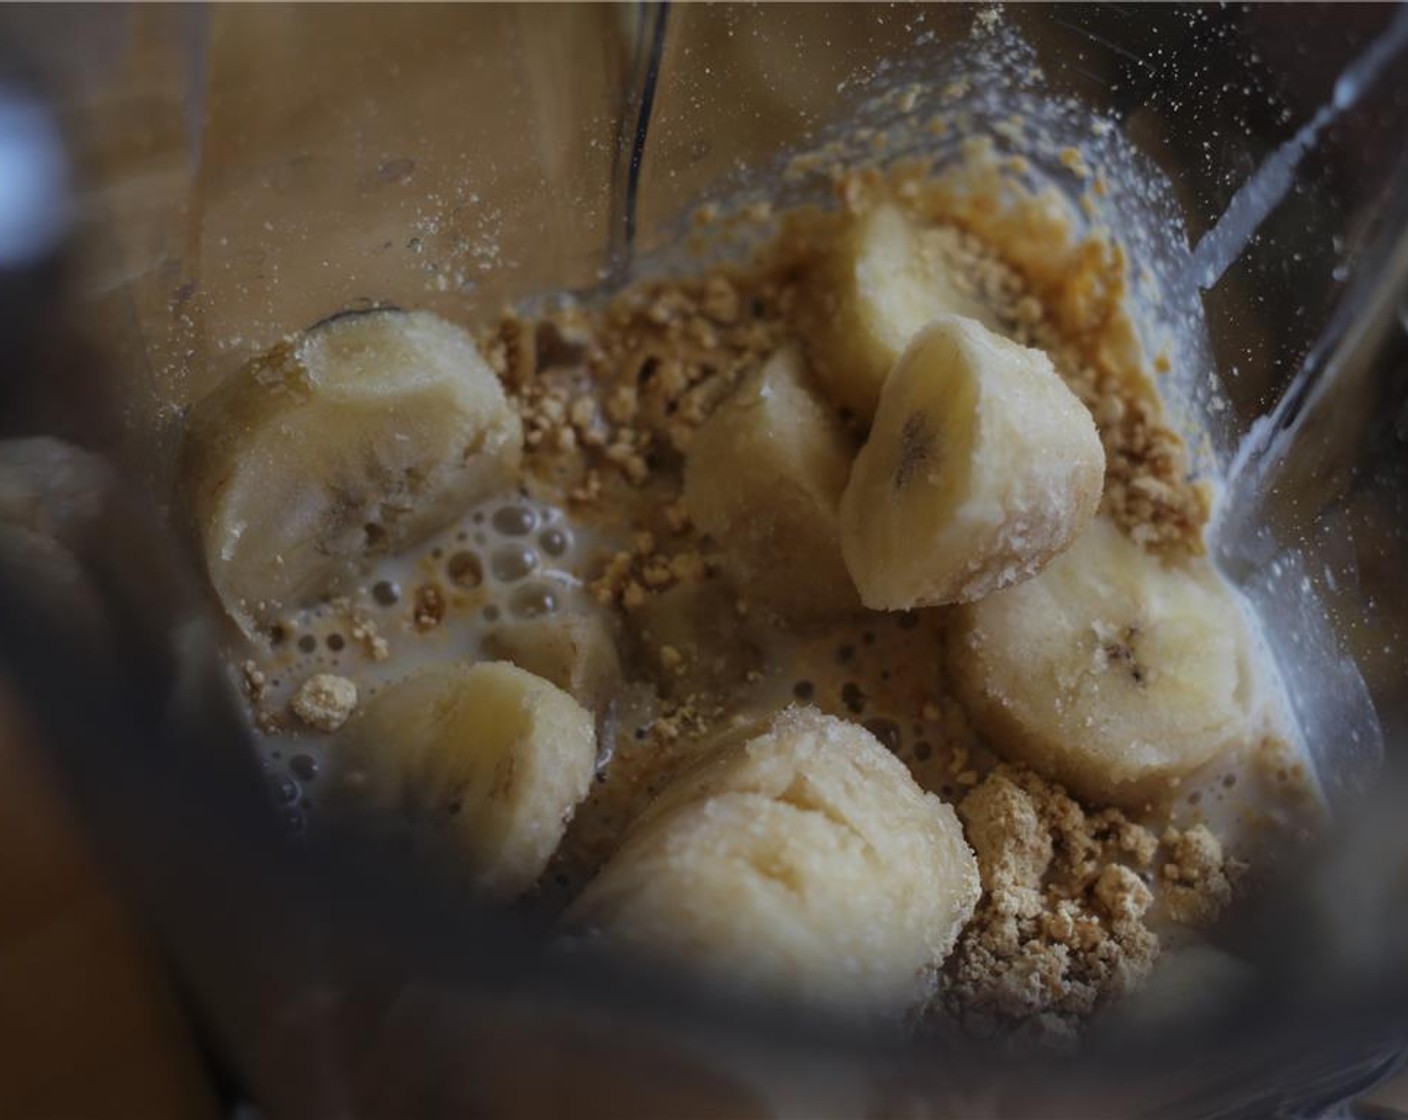 step 1 In a blender, add Almond Milk (1/2 cup), Banana (1), Peanut Butter (2 Tbsp), and Vanilla Whey Protein Powder (1/4 cup).